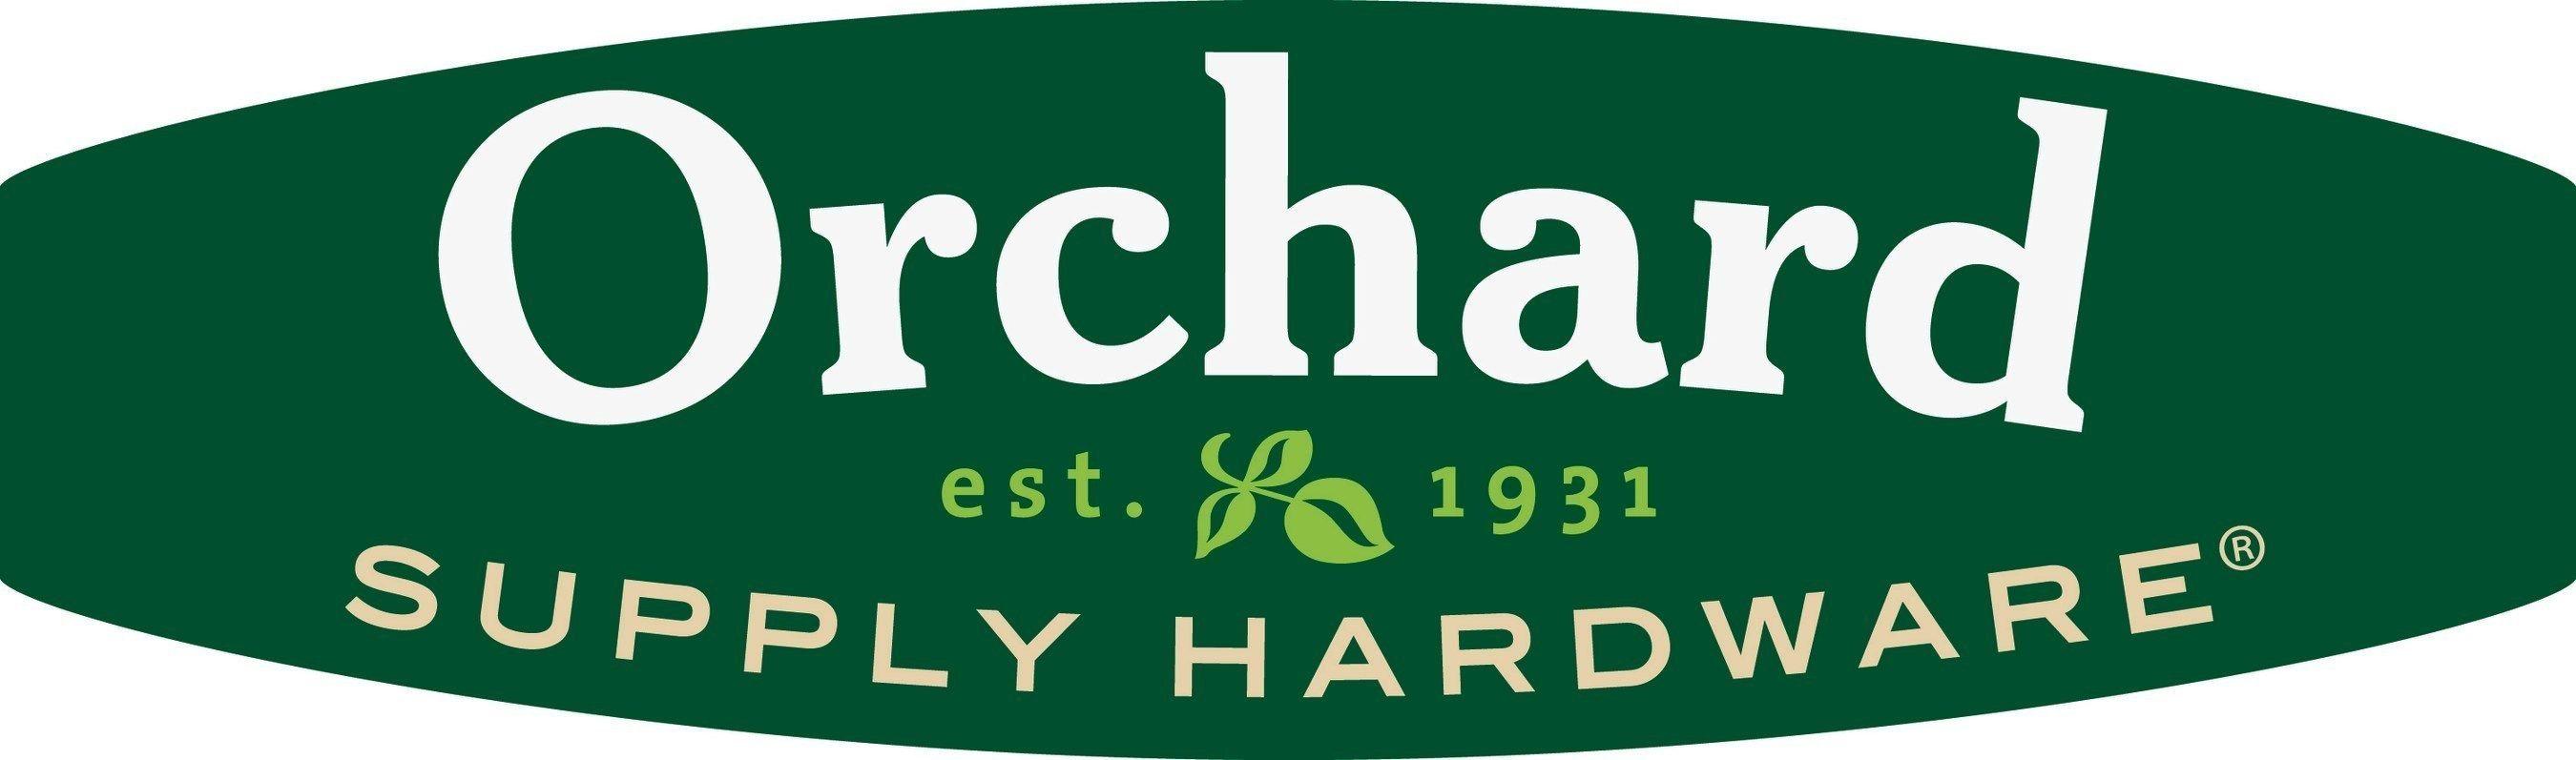 Orchard Supply Logo - Orchard Supply Hardware Achieves Strong Annual Growth and Expansion ...